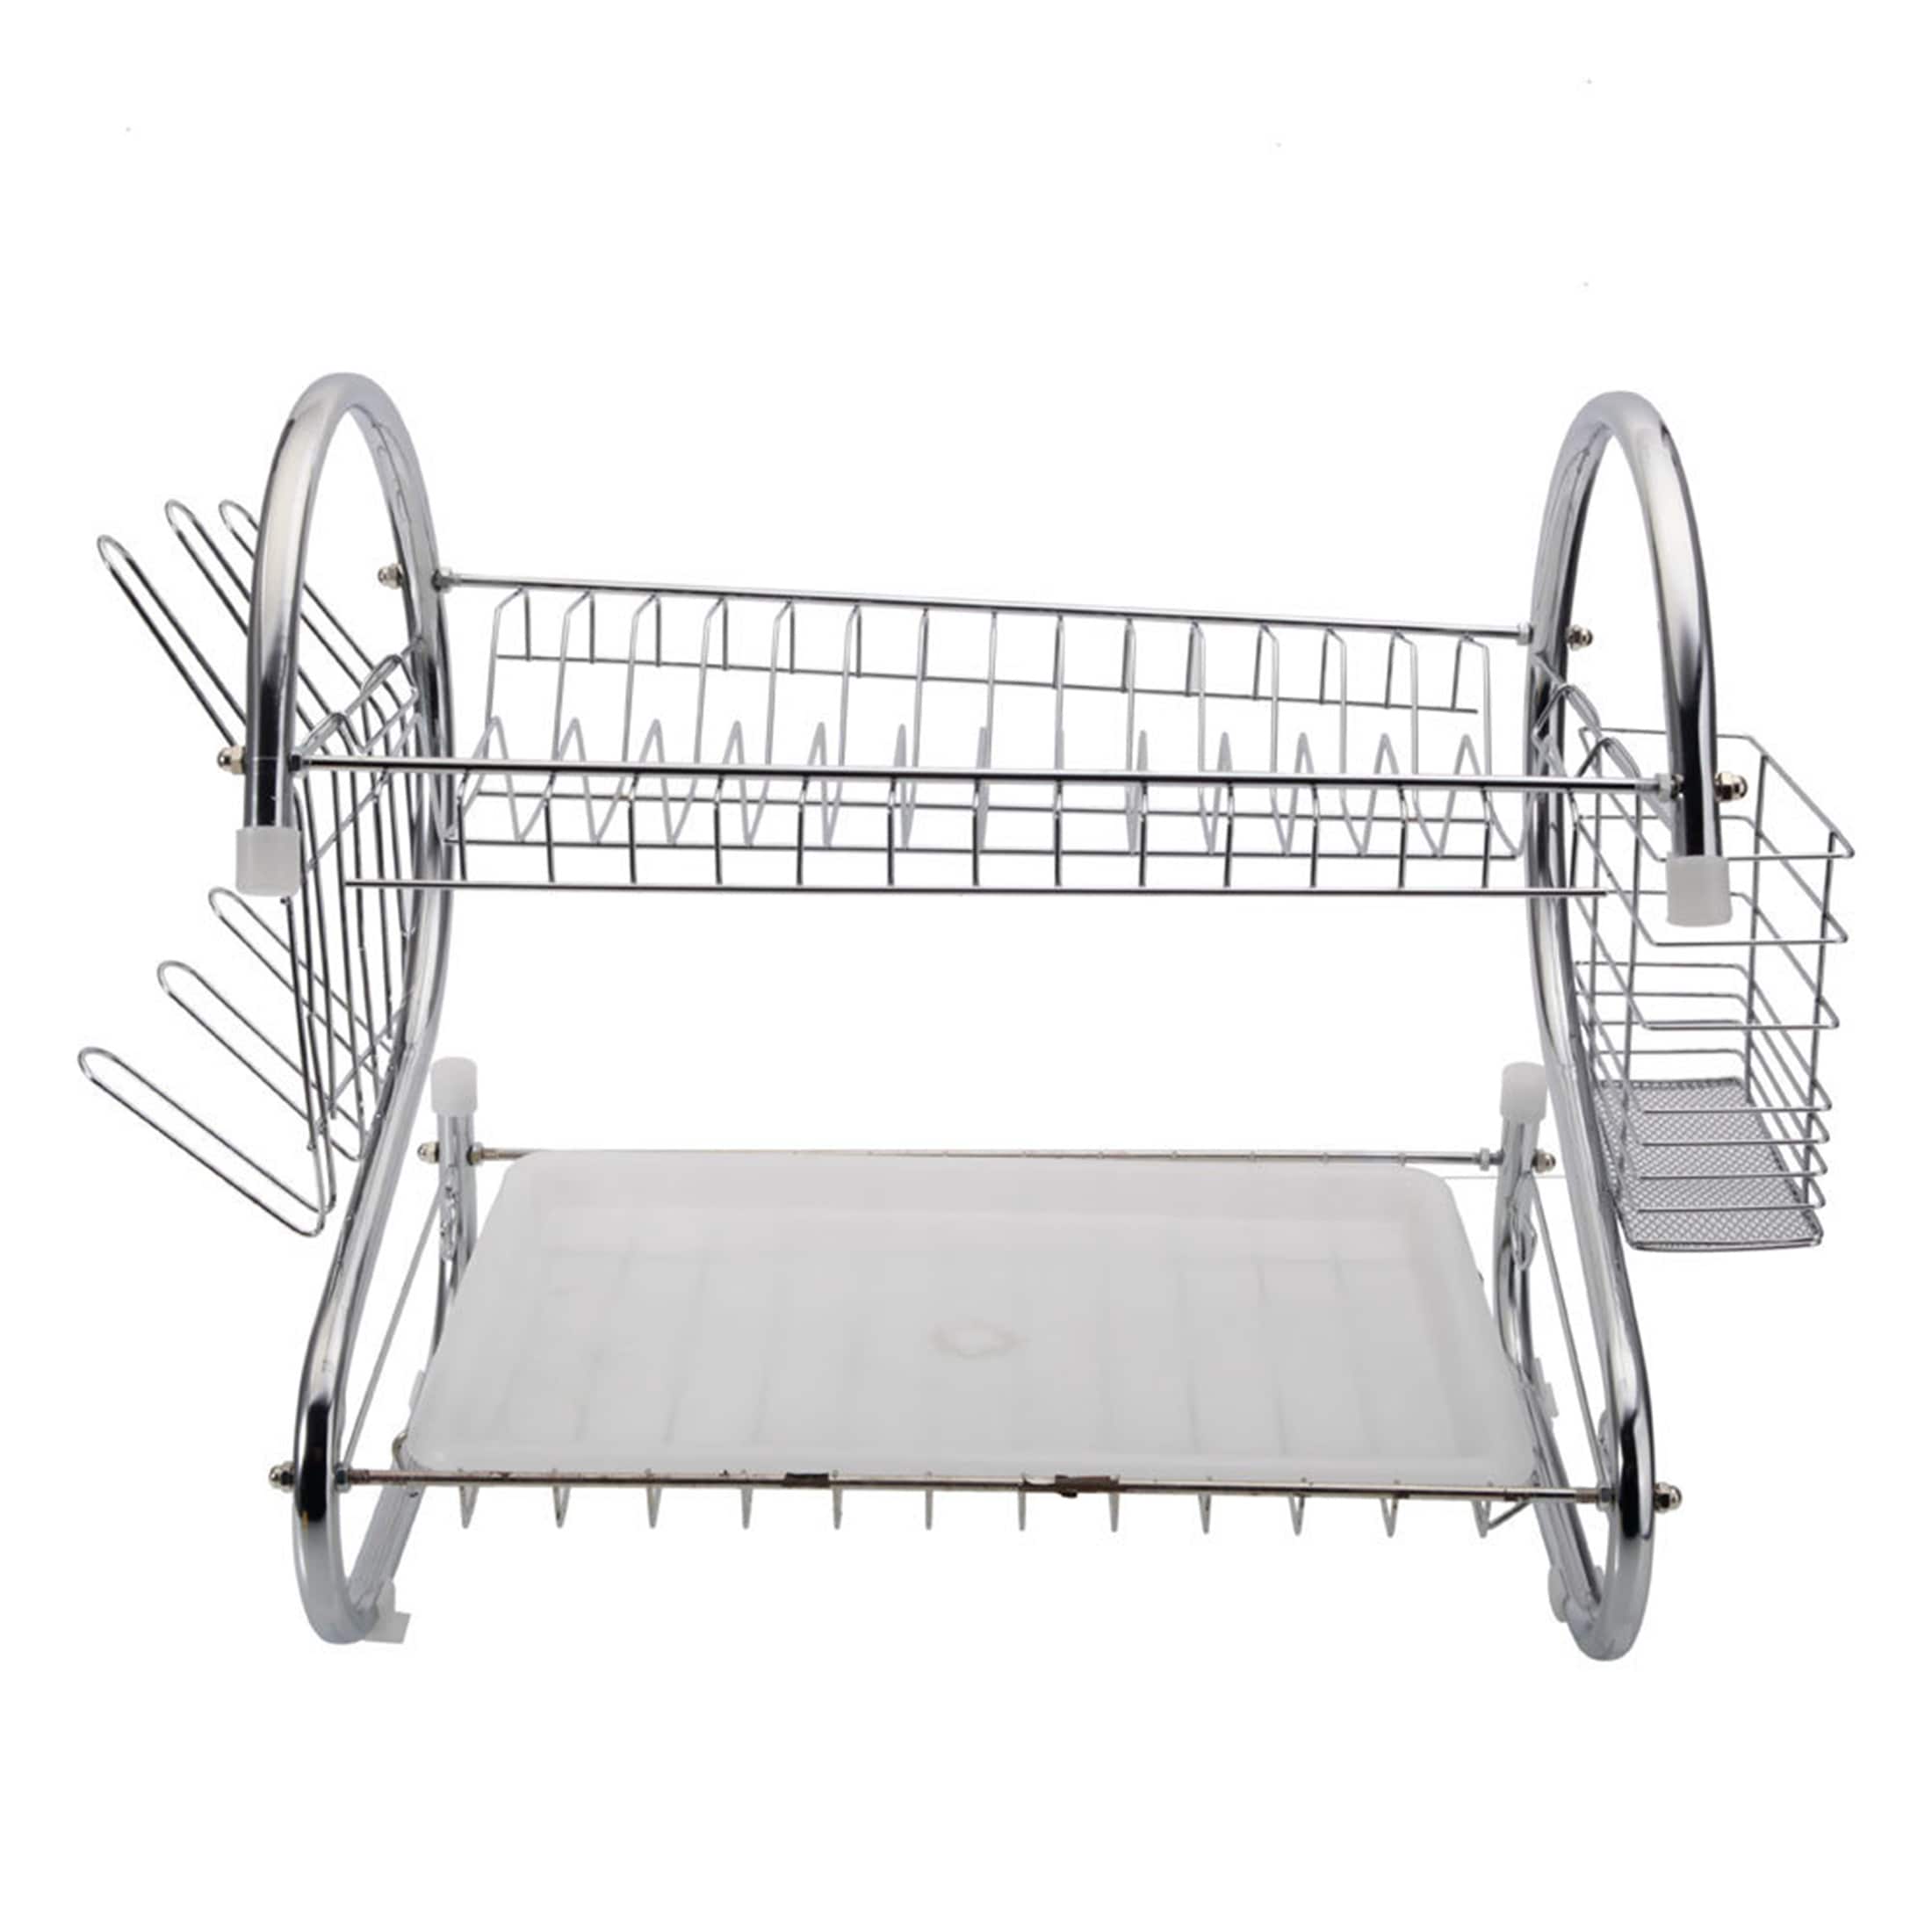 https://ak1.ostkcdn.com/images/products/is/images/direct/22cbd062dc19bdb8be95fca891cb3871ed91b385/2-Tier-Dish-Drying-Rack-Drainer-Stainless-Steel-Kitchen-Cutlery-Holder.jpg